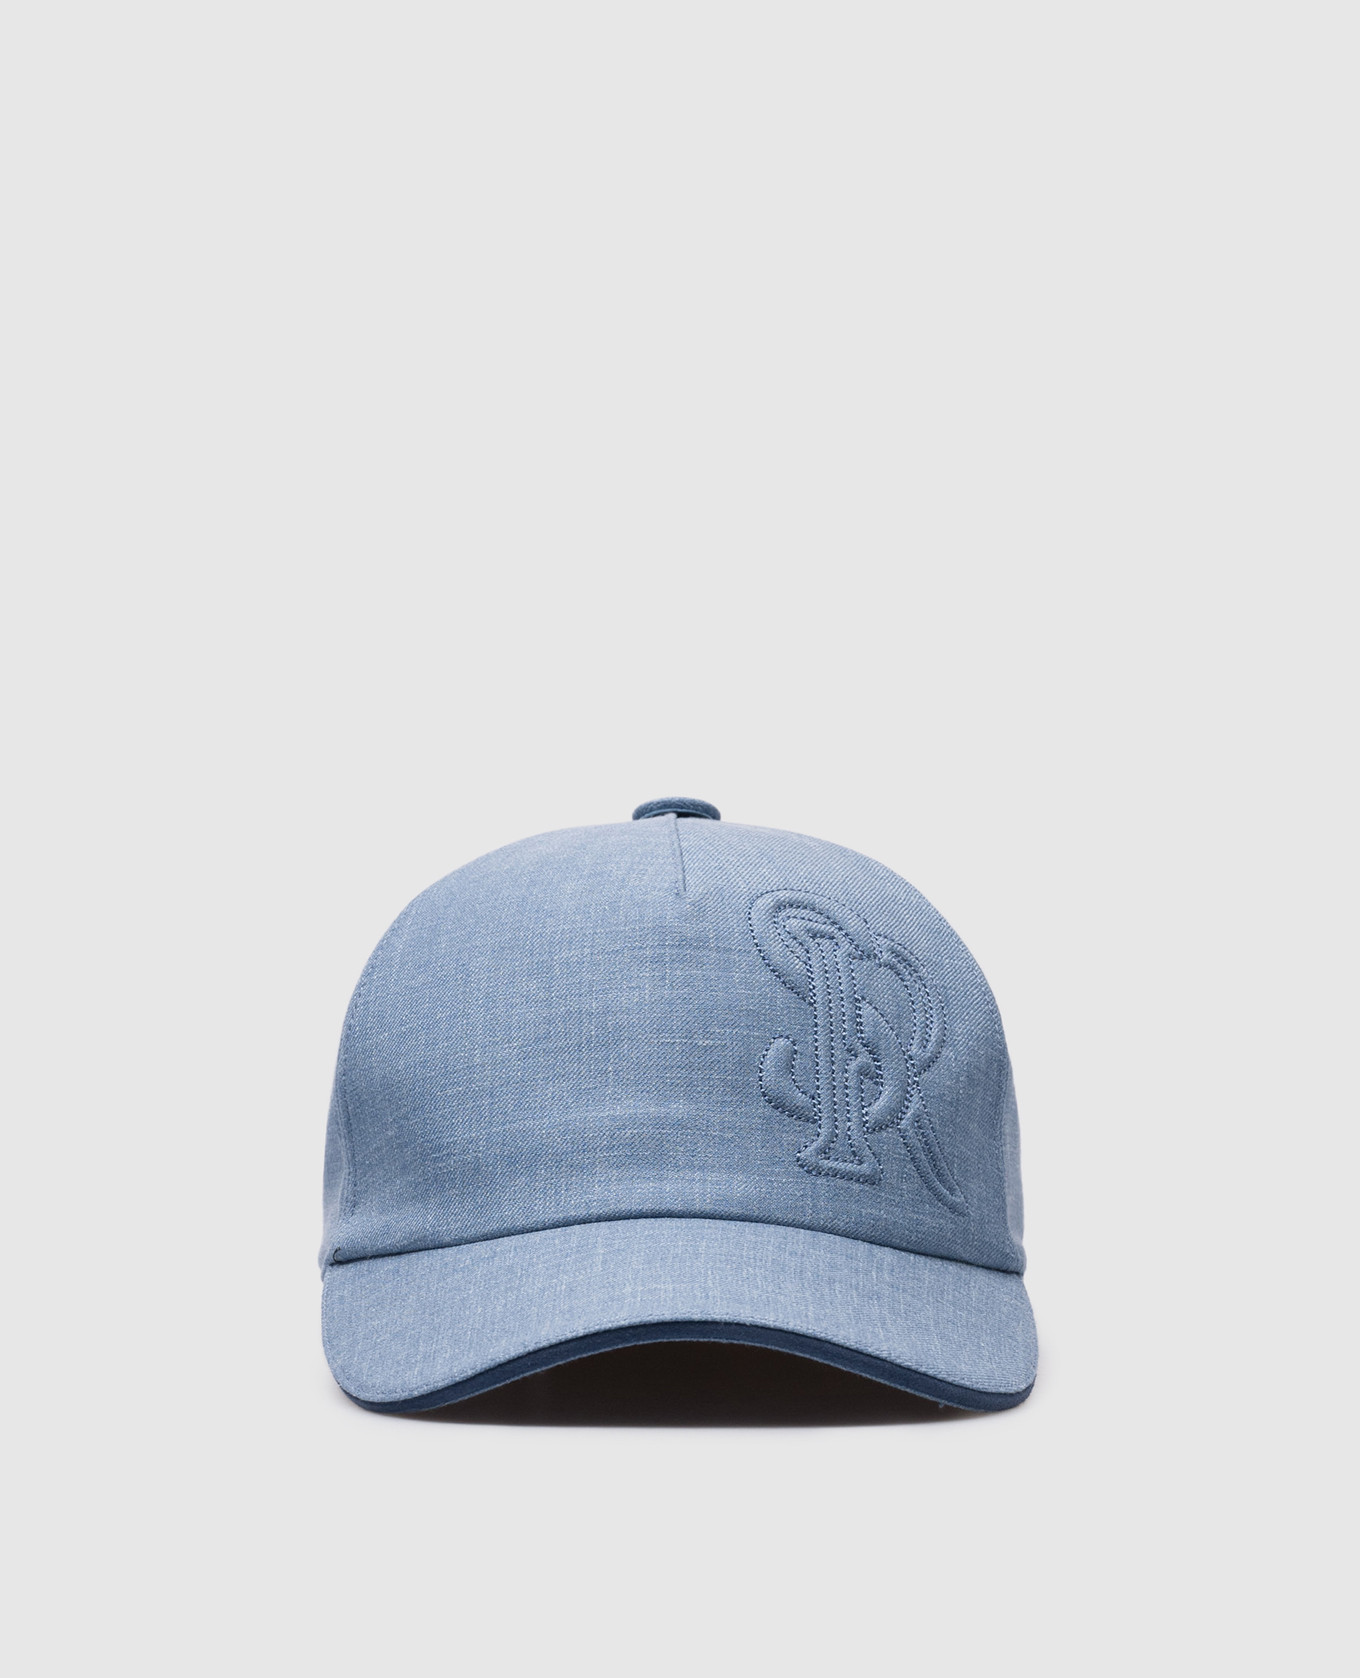 Blue cap in wool, silk and linen with textured logo monogram